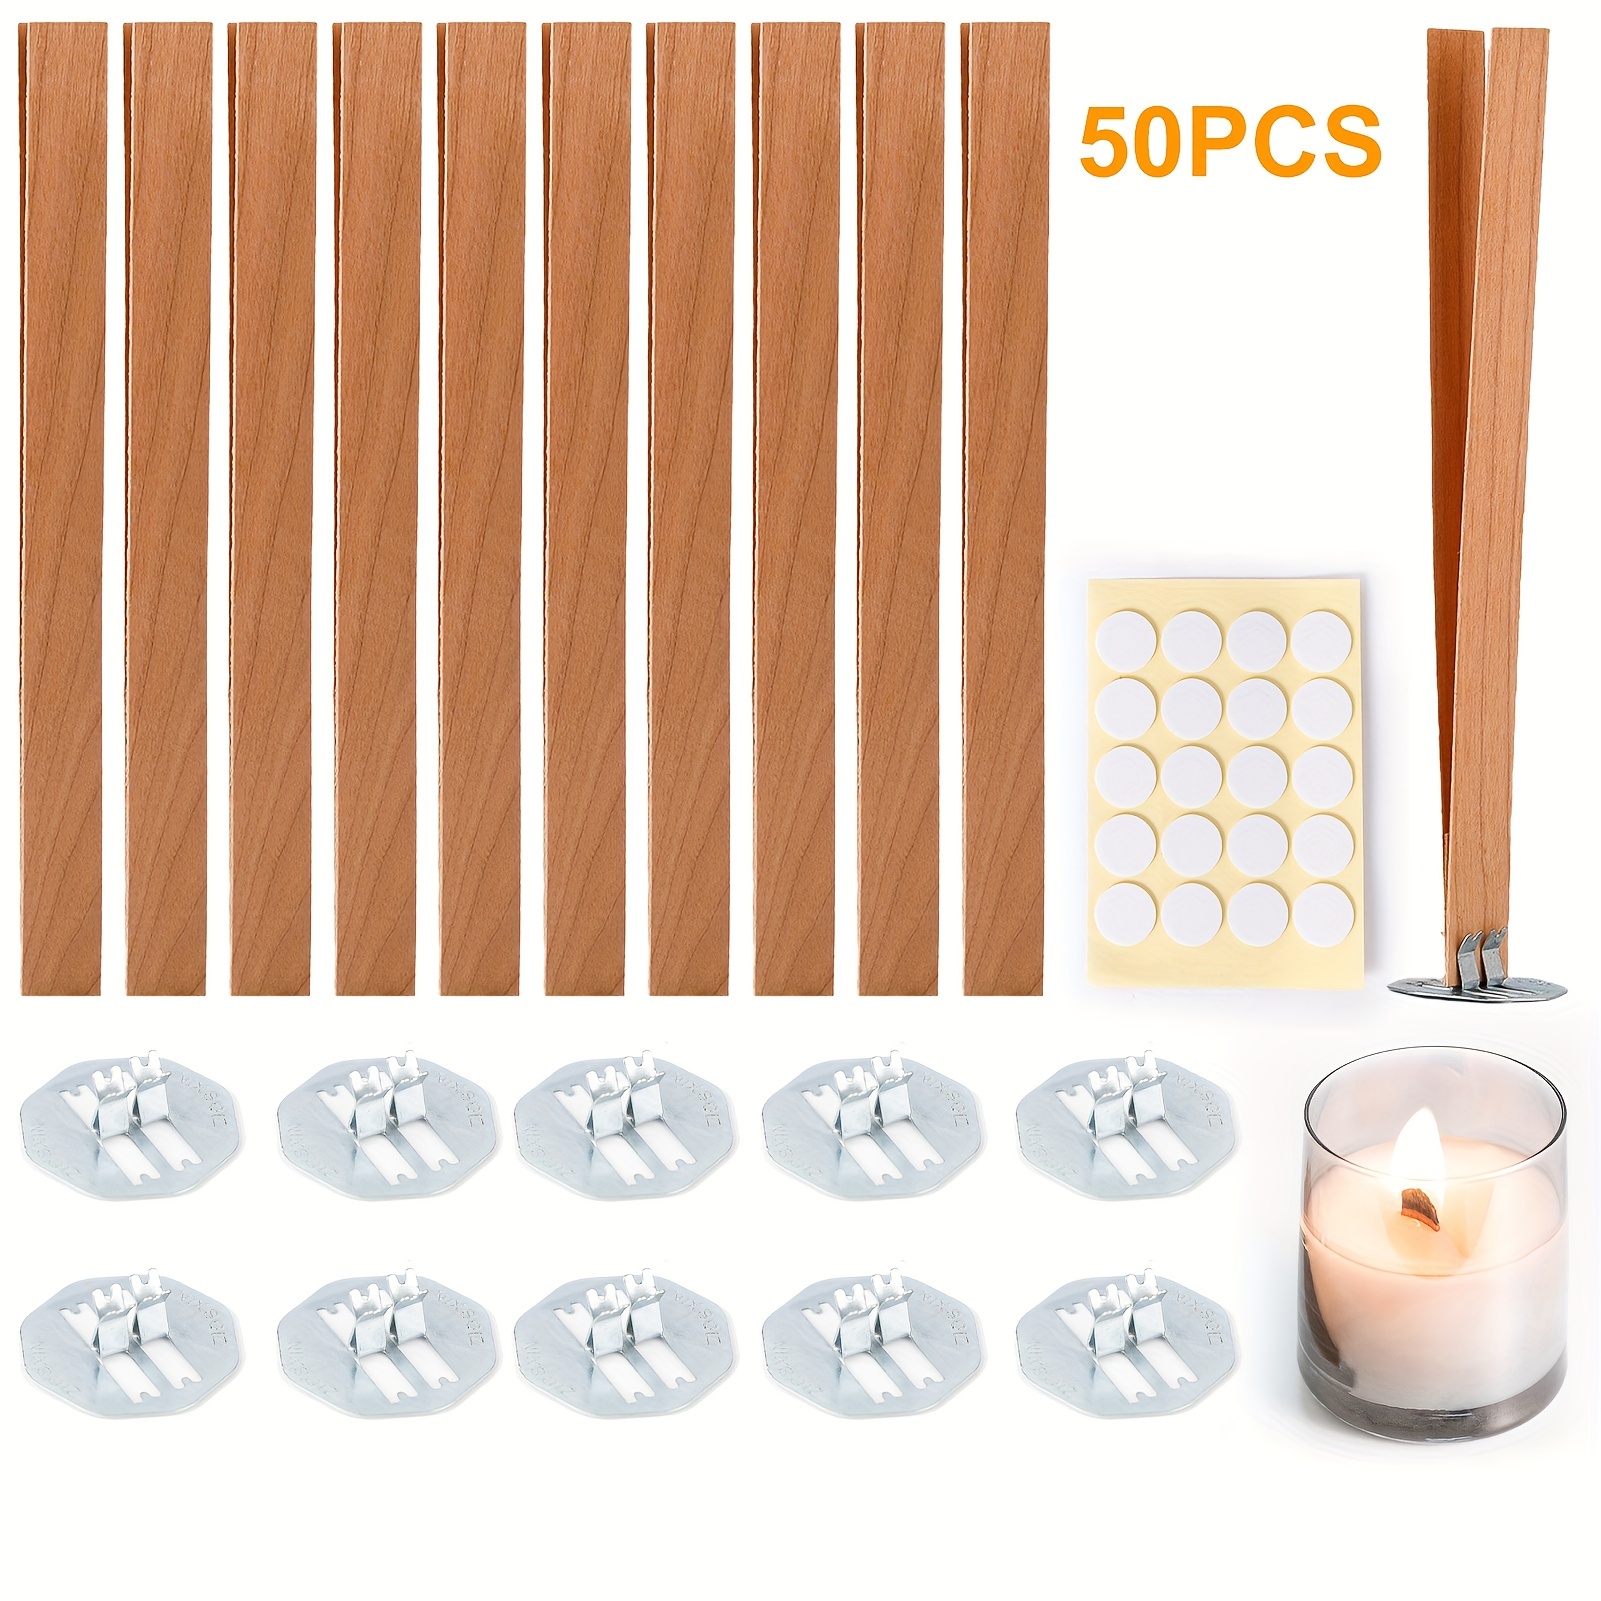 20pcs-(10 Wood Chips + 10 Clips)Wood Candle Wicks-Wooden Wick Long Lasting  Flame-Easily Burn,Natural Candle Cores